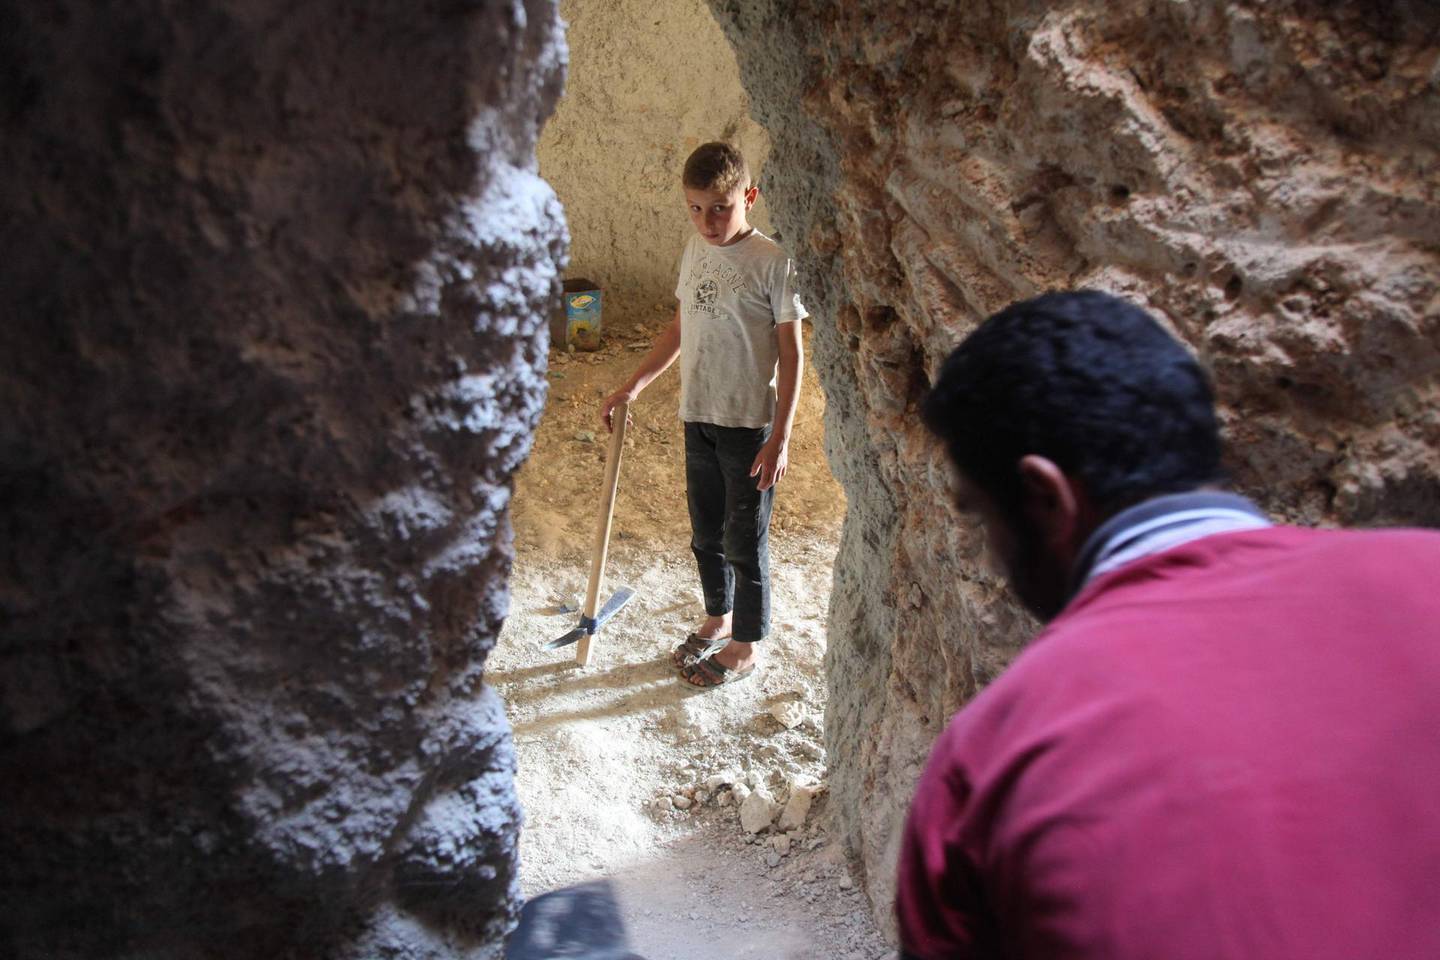 TOPSHOT - A Syrian man digs a cave with his brother at an unknown location in the southern countryside of Idlib province on September 11, 2018, in anticipation for an upcoming government forces offensive. - The Syrian regime and its Russian ally are threatening an offensive to retake the northwestern province of Idlib, Syria's last rebel bastion. (Photo by Amer ALHAMWE / AFP)